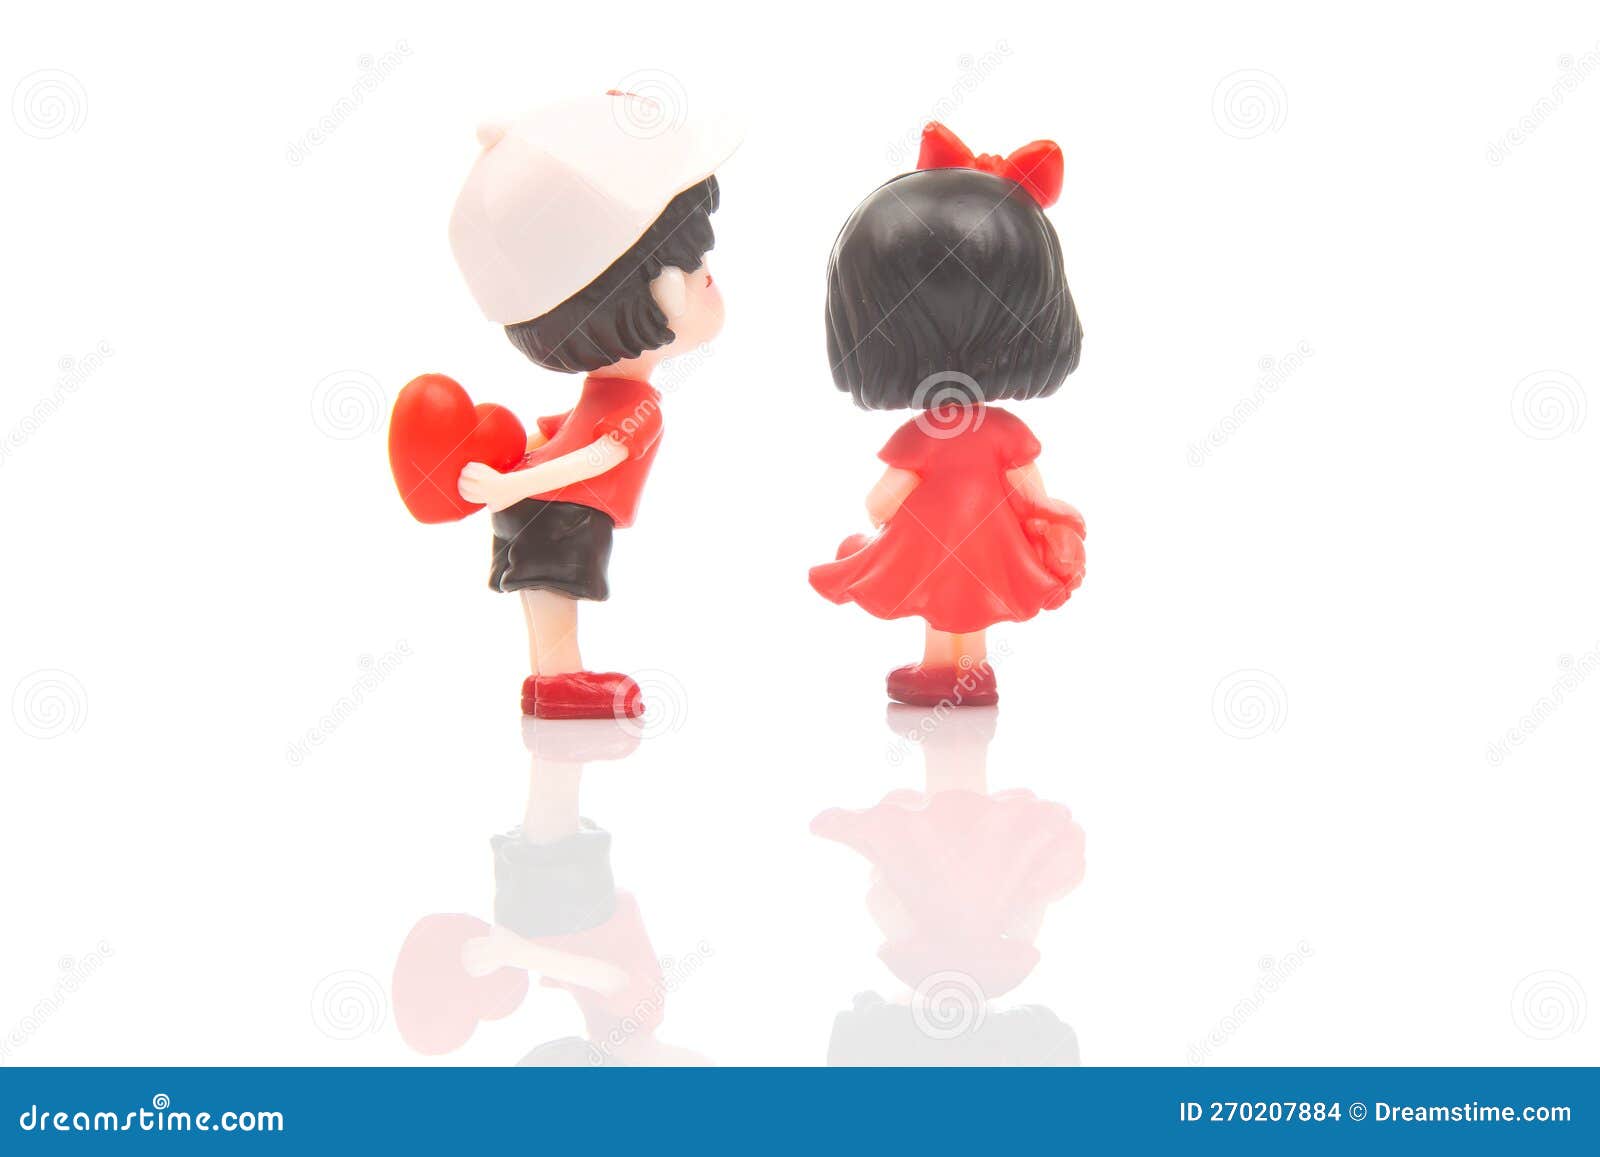 Miniature People. Figures for the Game. Romantic Couple of Young ...